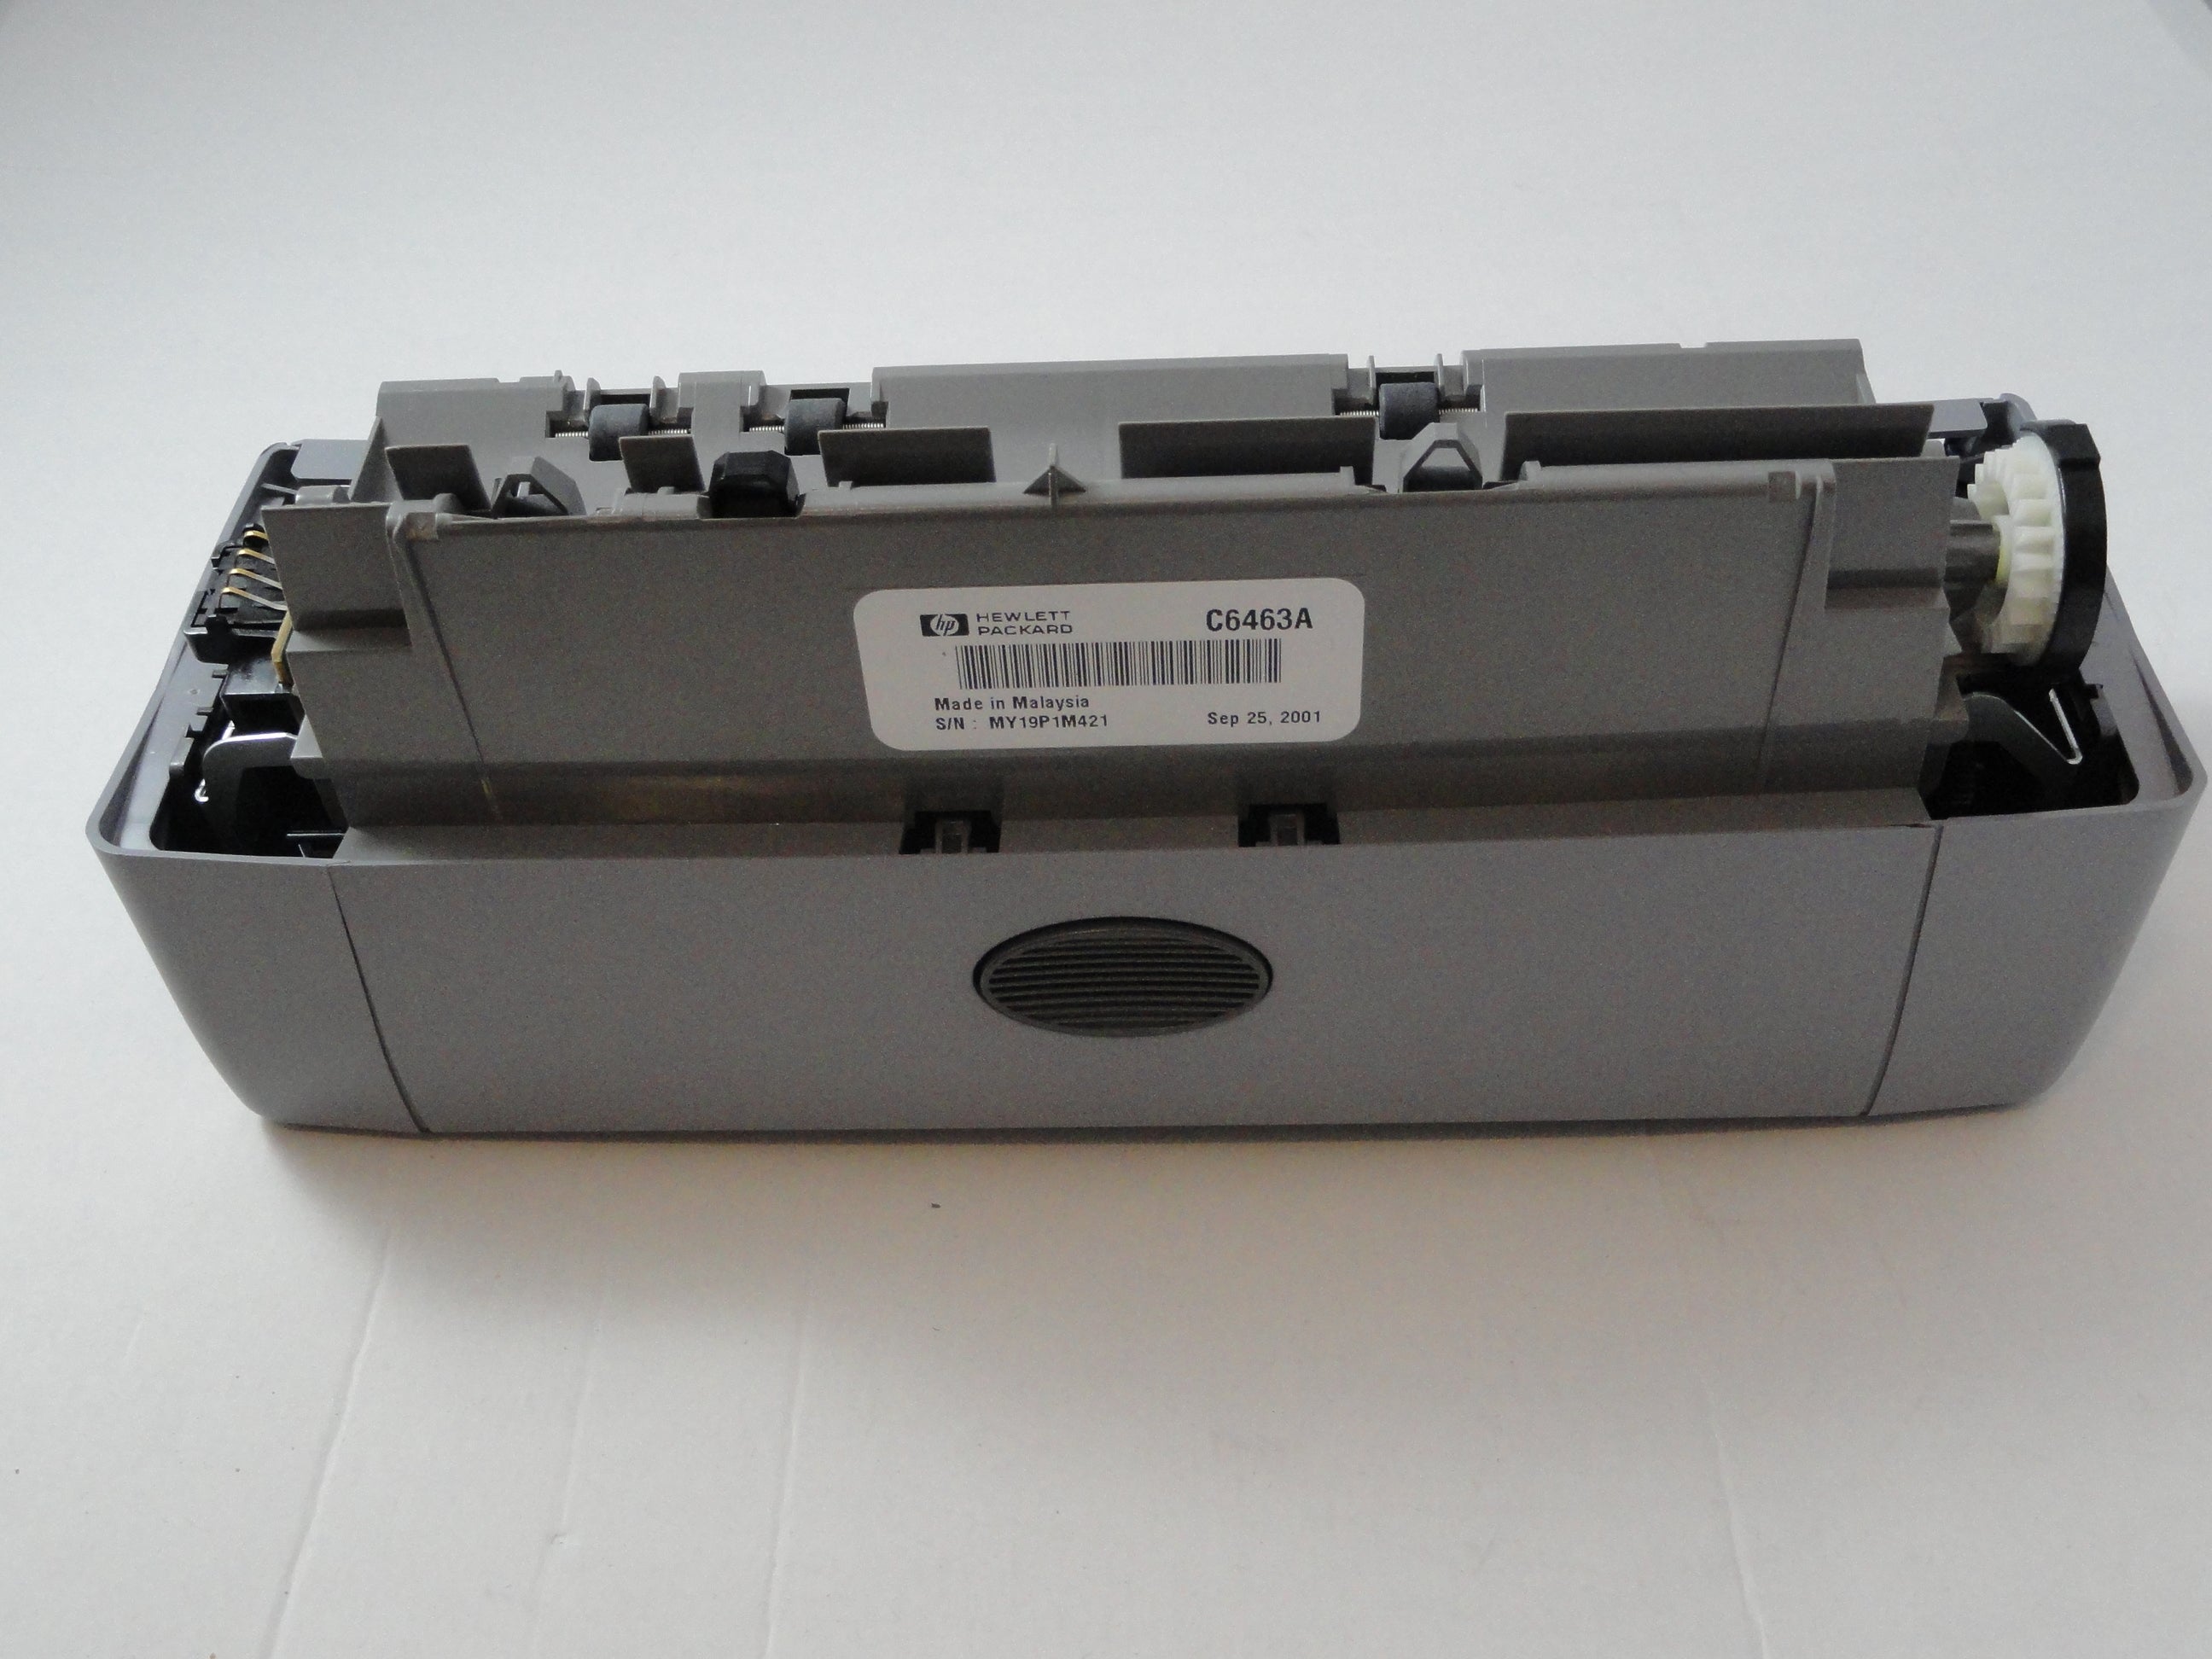 PR02710_C6463A_HP, Two-Sided Printing Module 900 Series - Gre - Image3